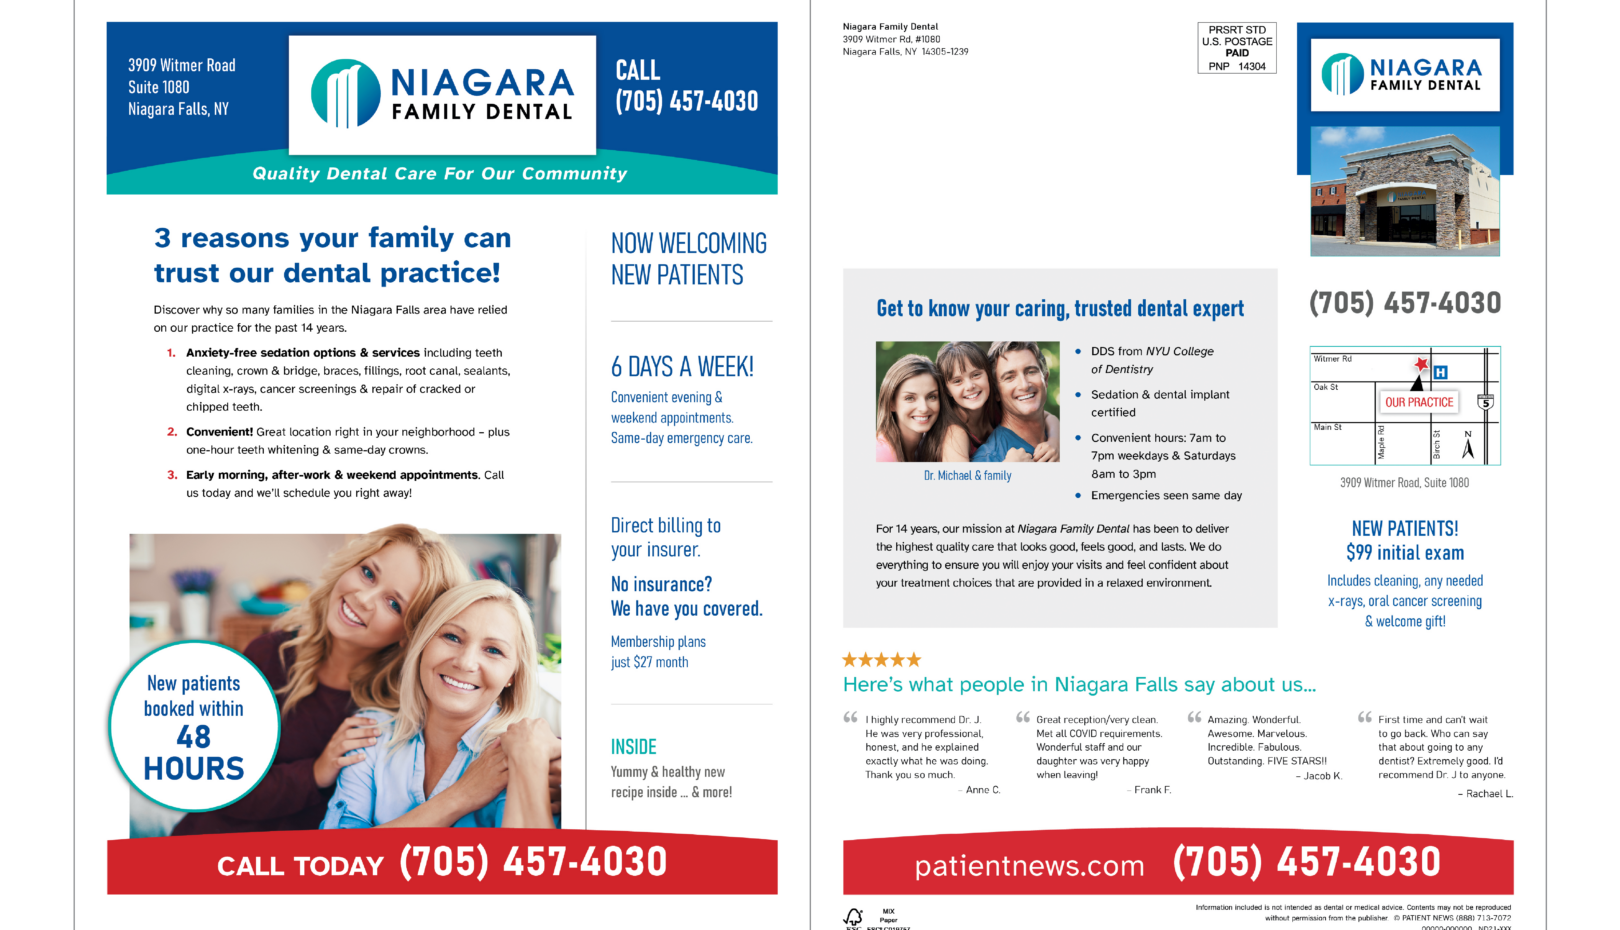 A flyer for niagara family dental shows two women hugging each other